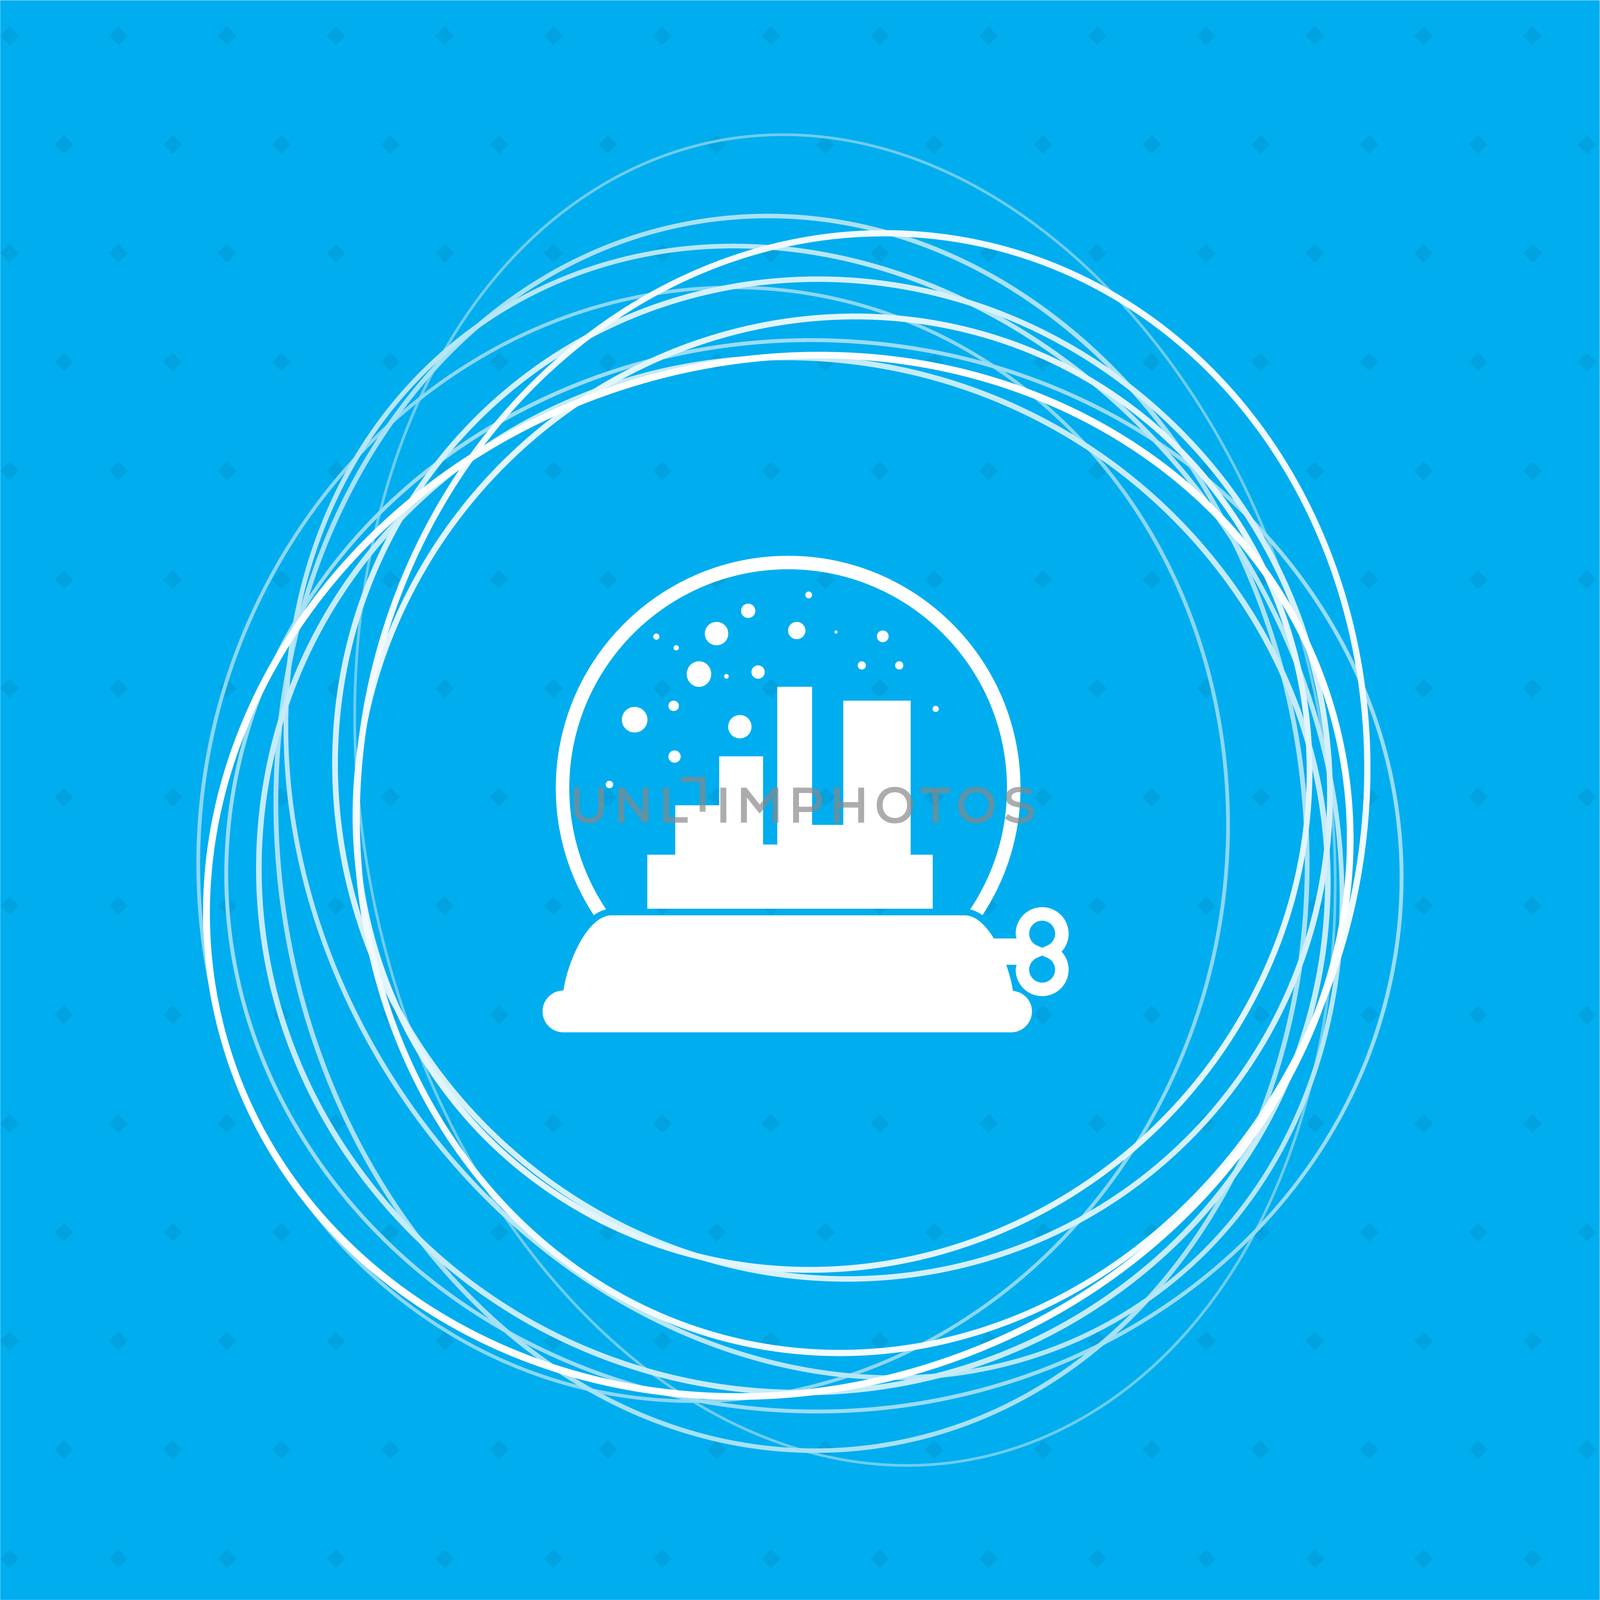 factory icon on a blue background with abstract circles around and place for your text. illustration